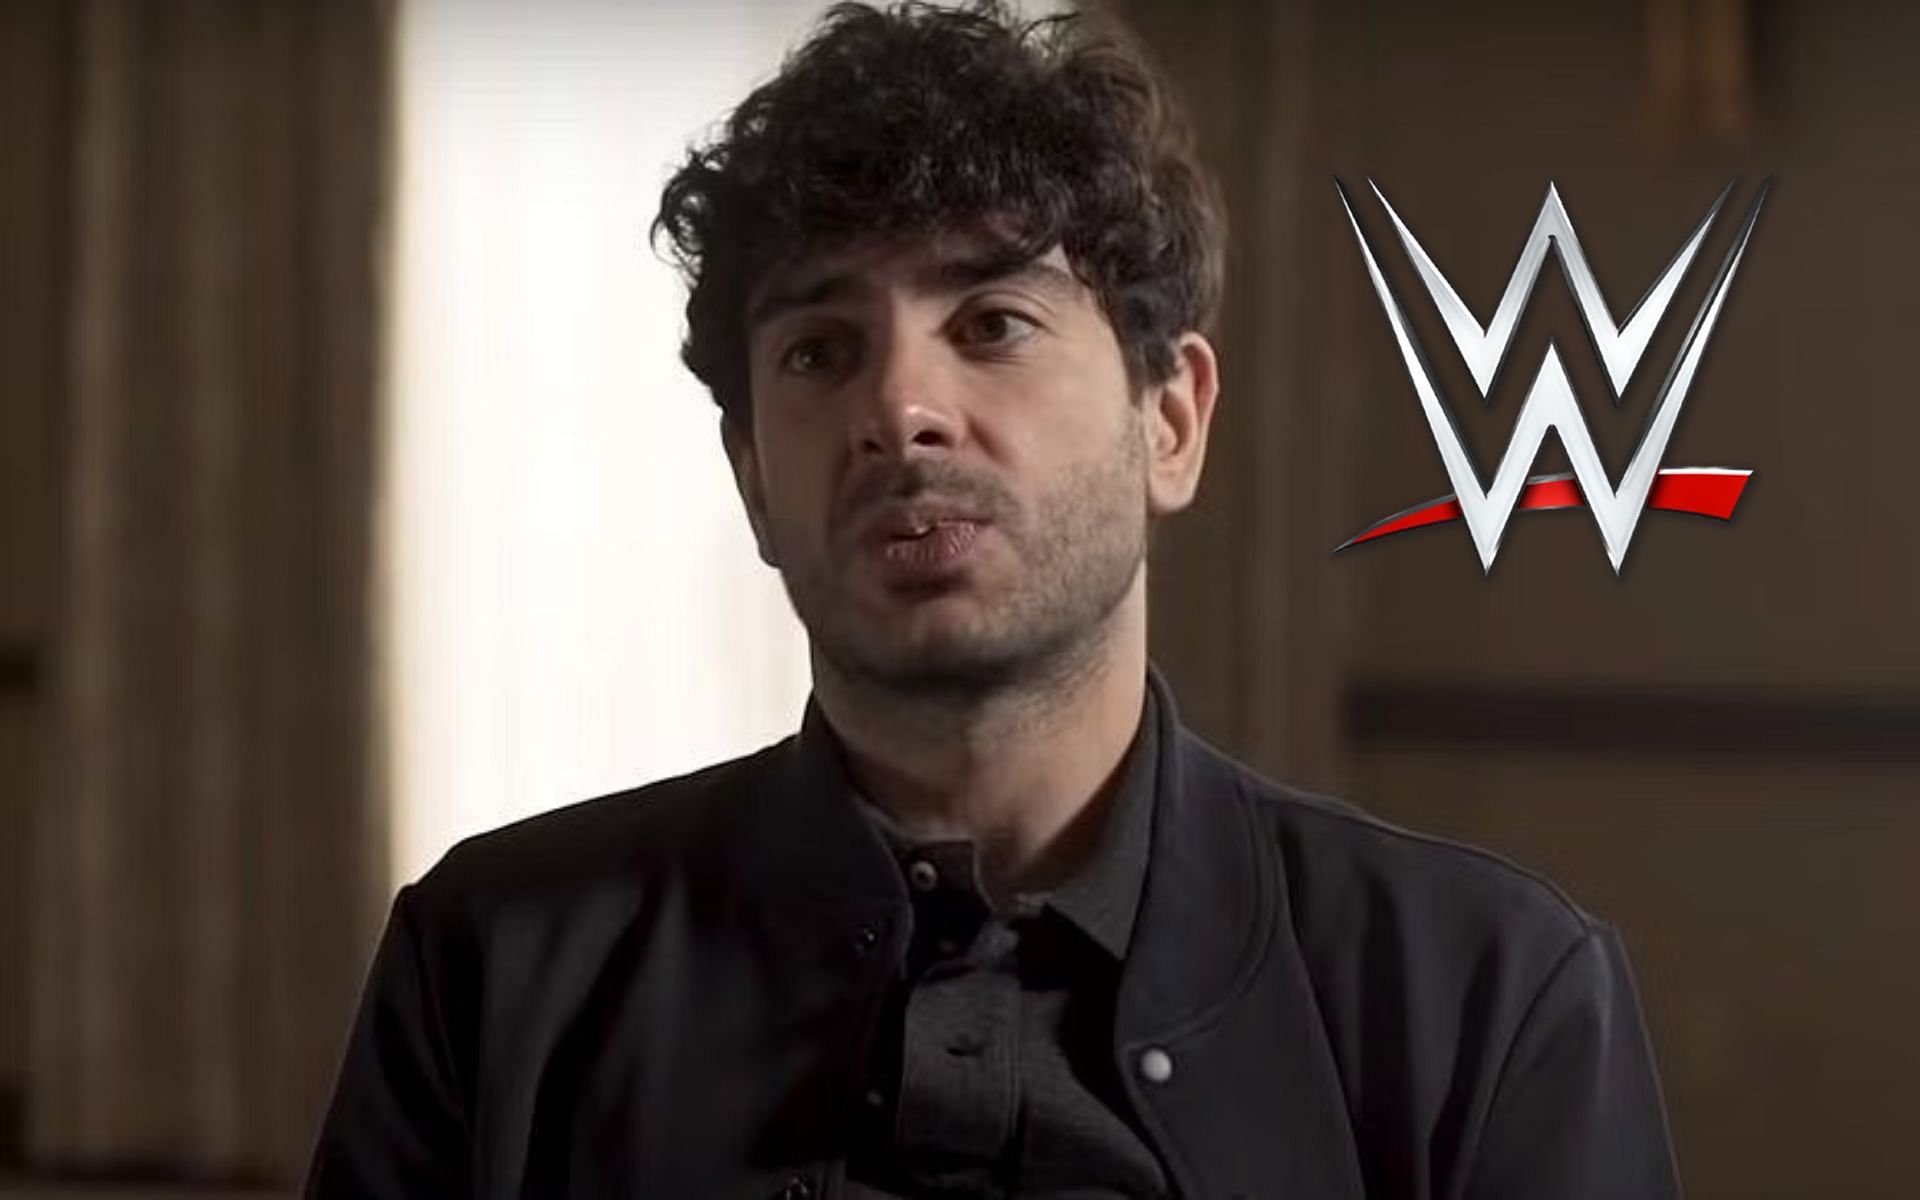 AEW President Tony Khan has dealt a lot of issues over the past few weeks.